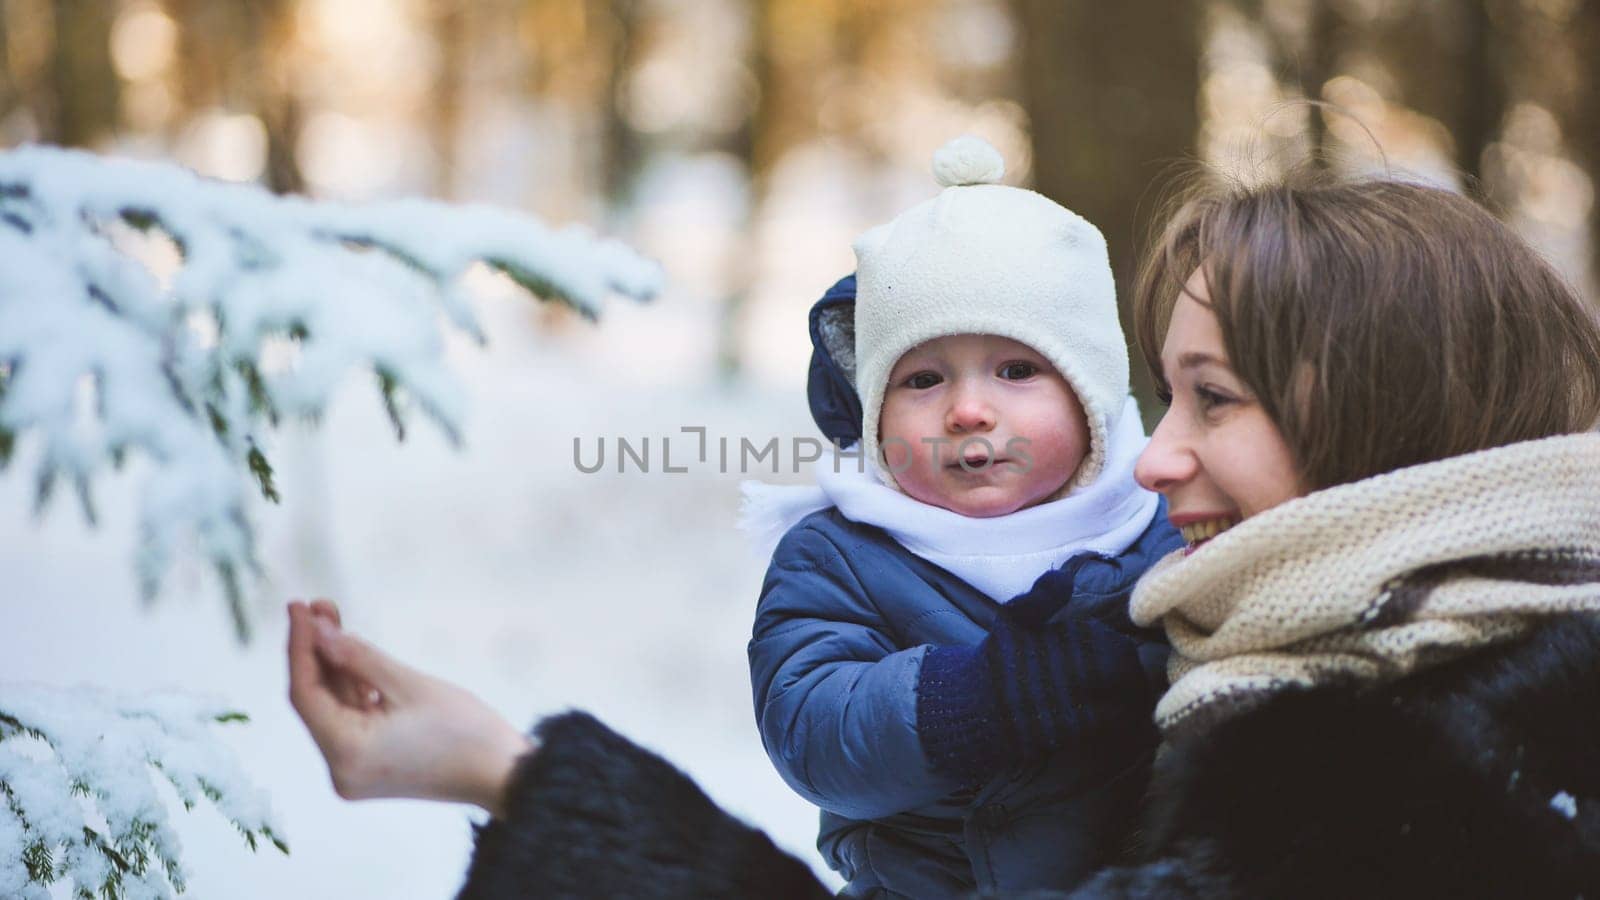 A mother shows her child a branch in a snow-covered forest